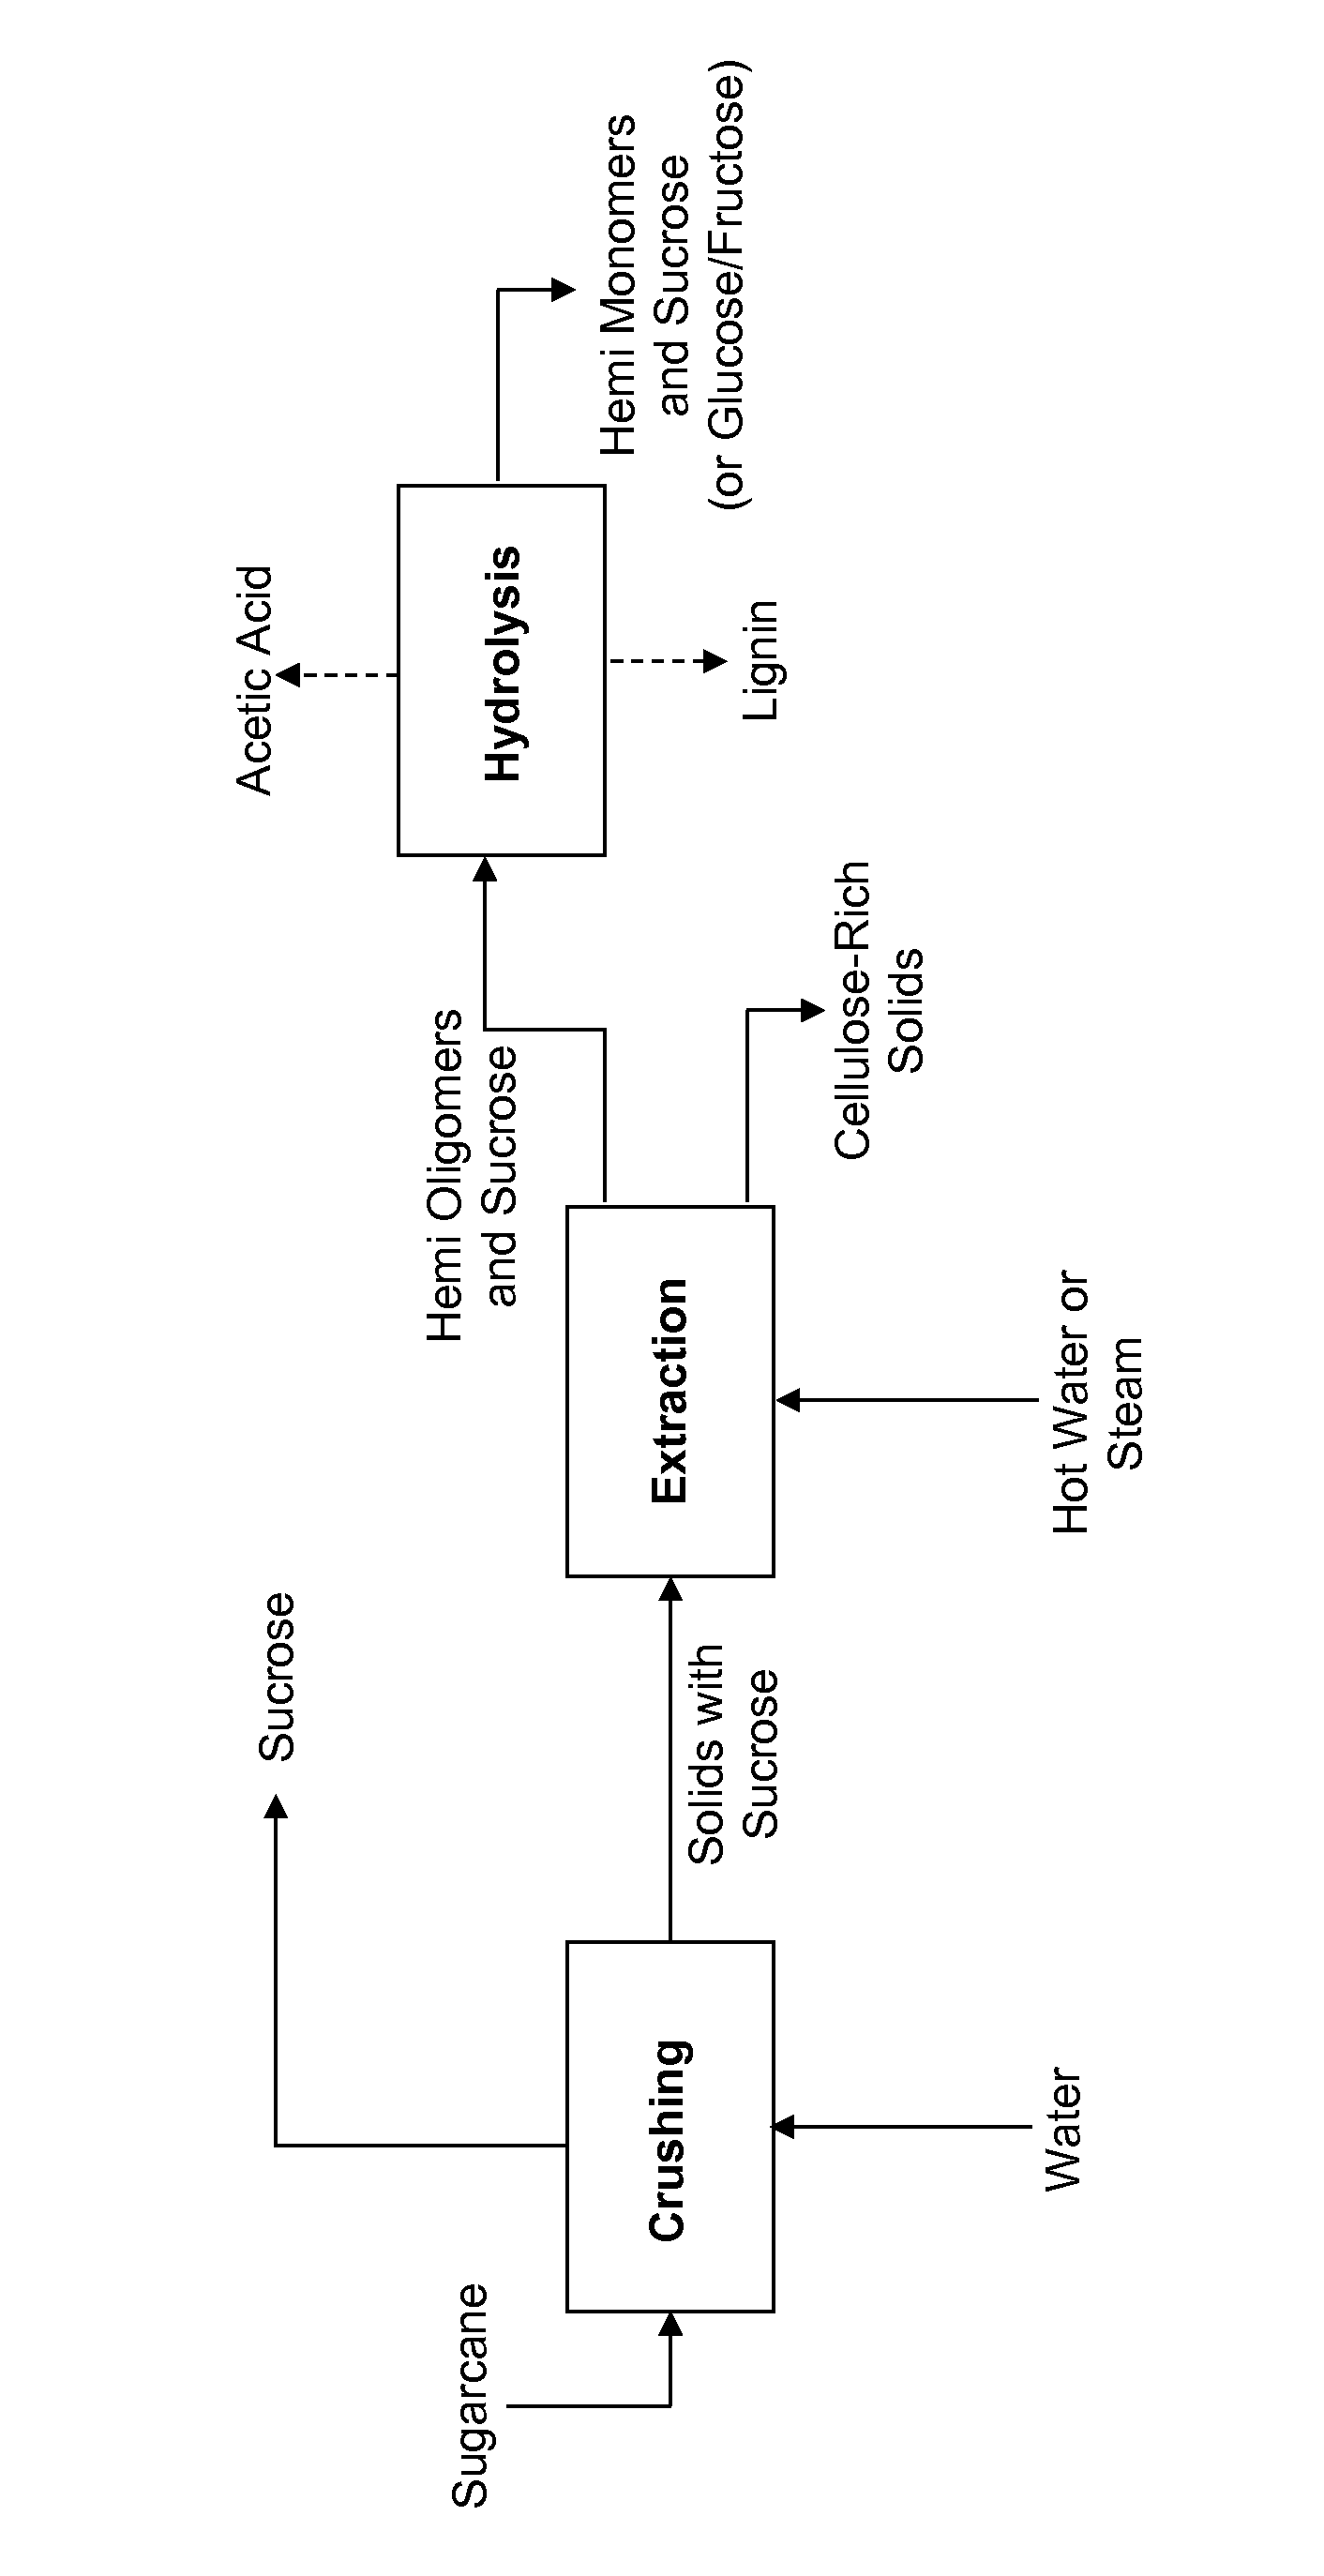 Processes and apparatus for refining sugarcane to produce sugars, biofuels, and/or biochemicals